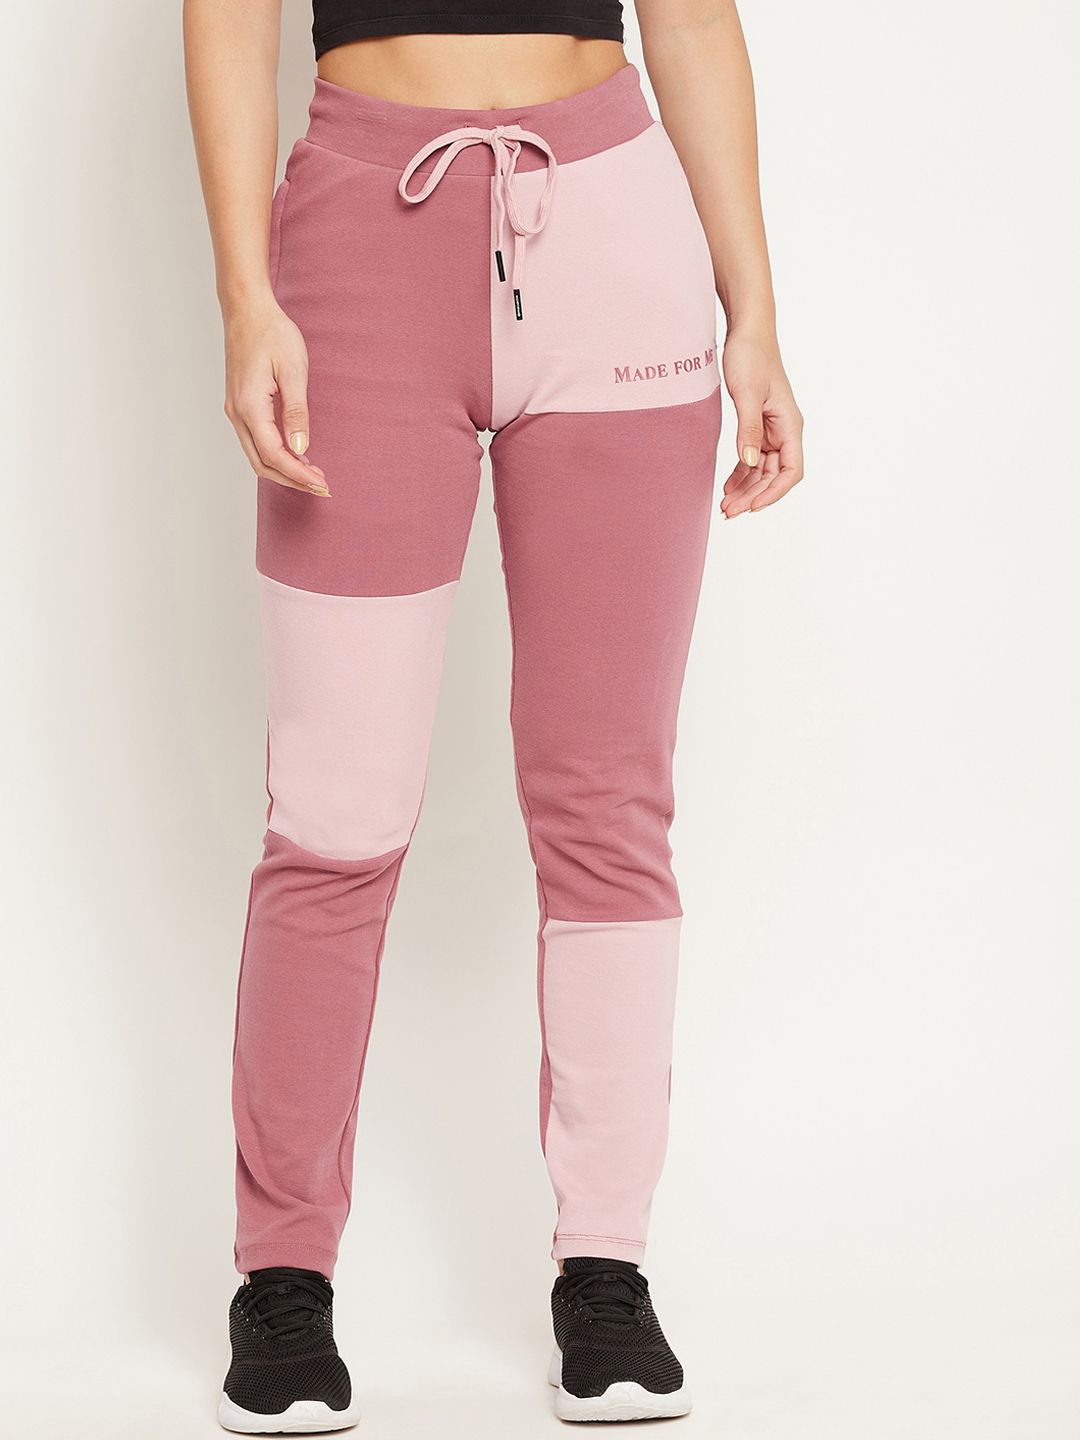 Madame Women Pink Colorblocked Track Pants Price in India